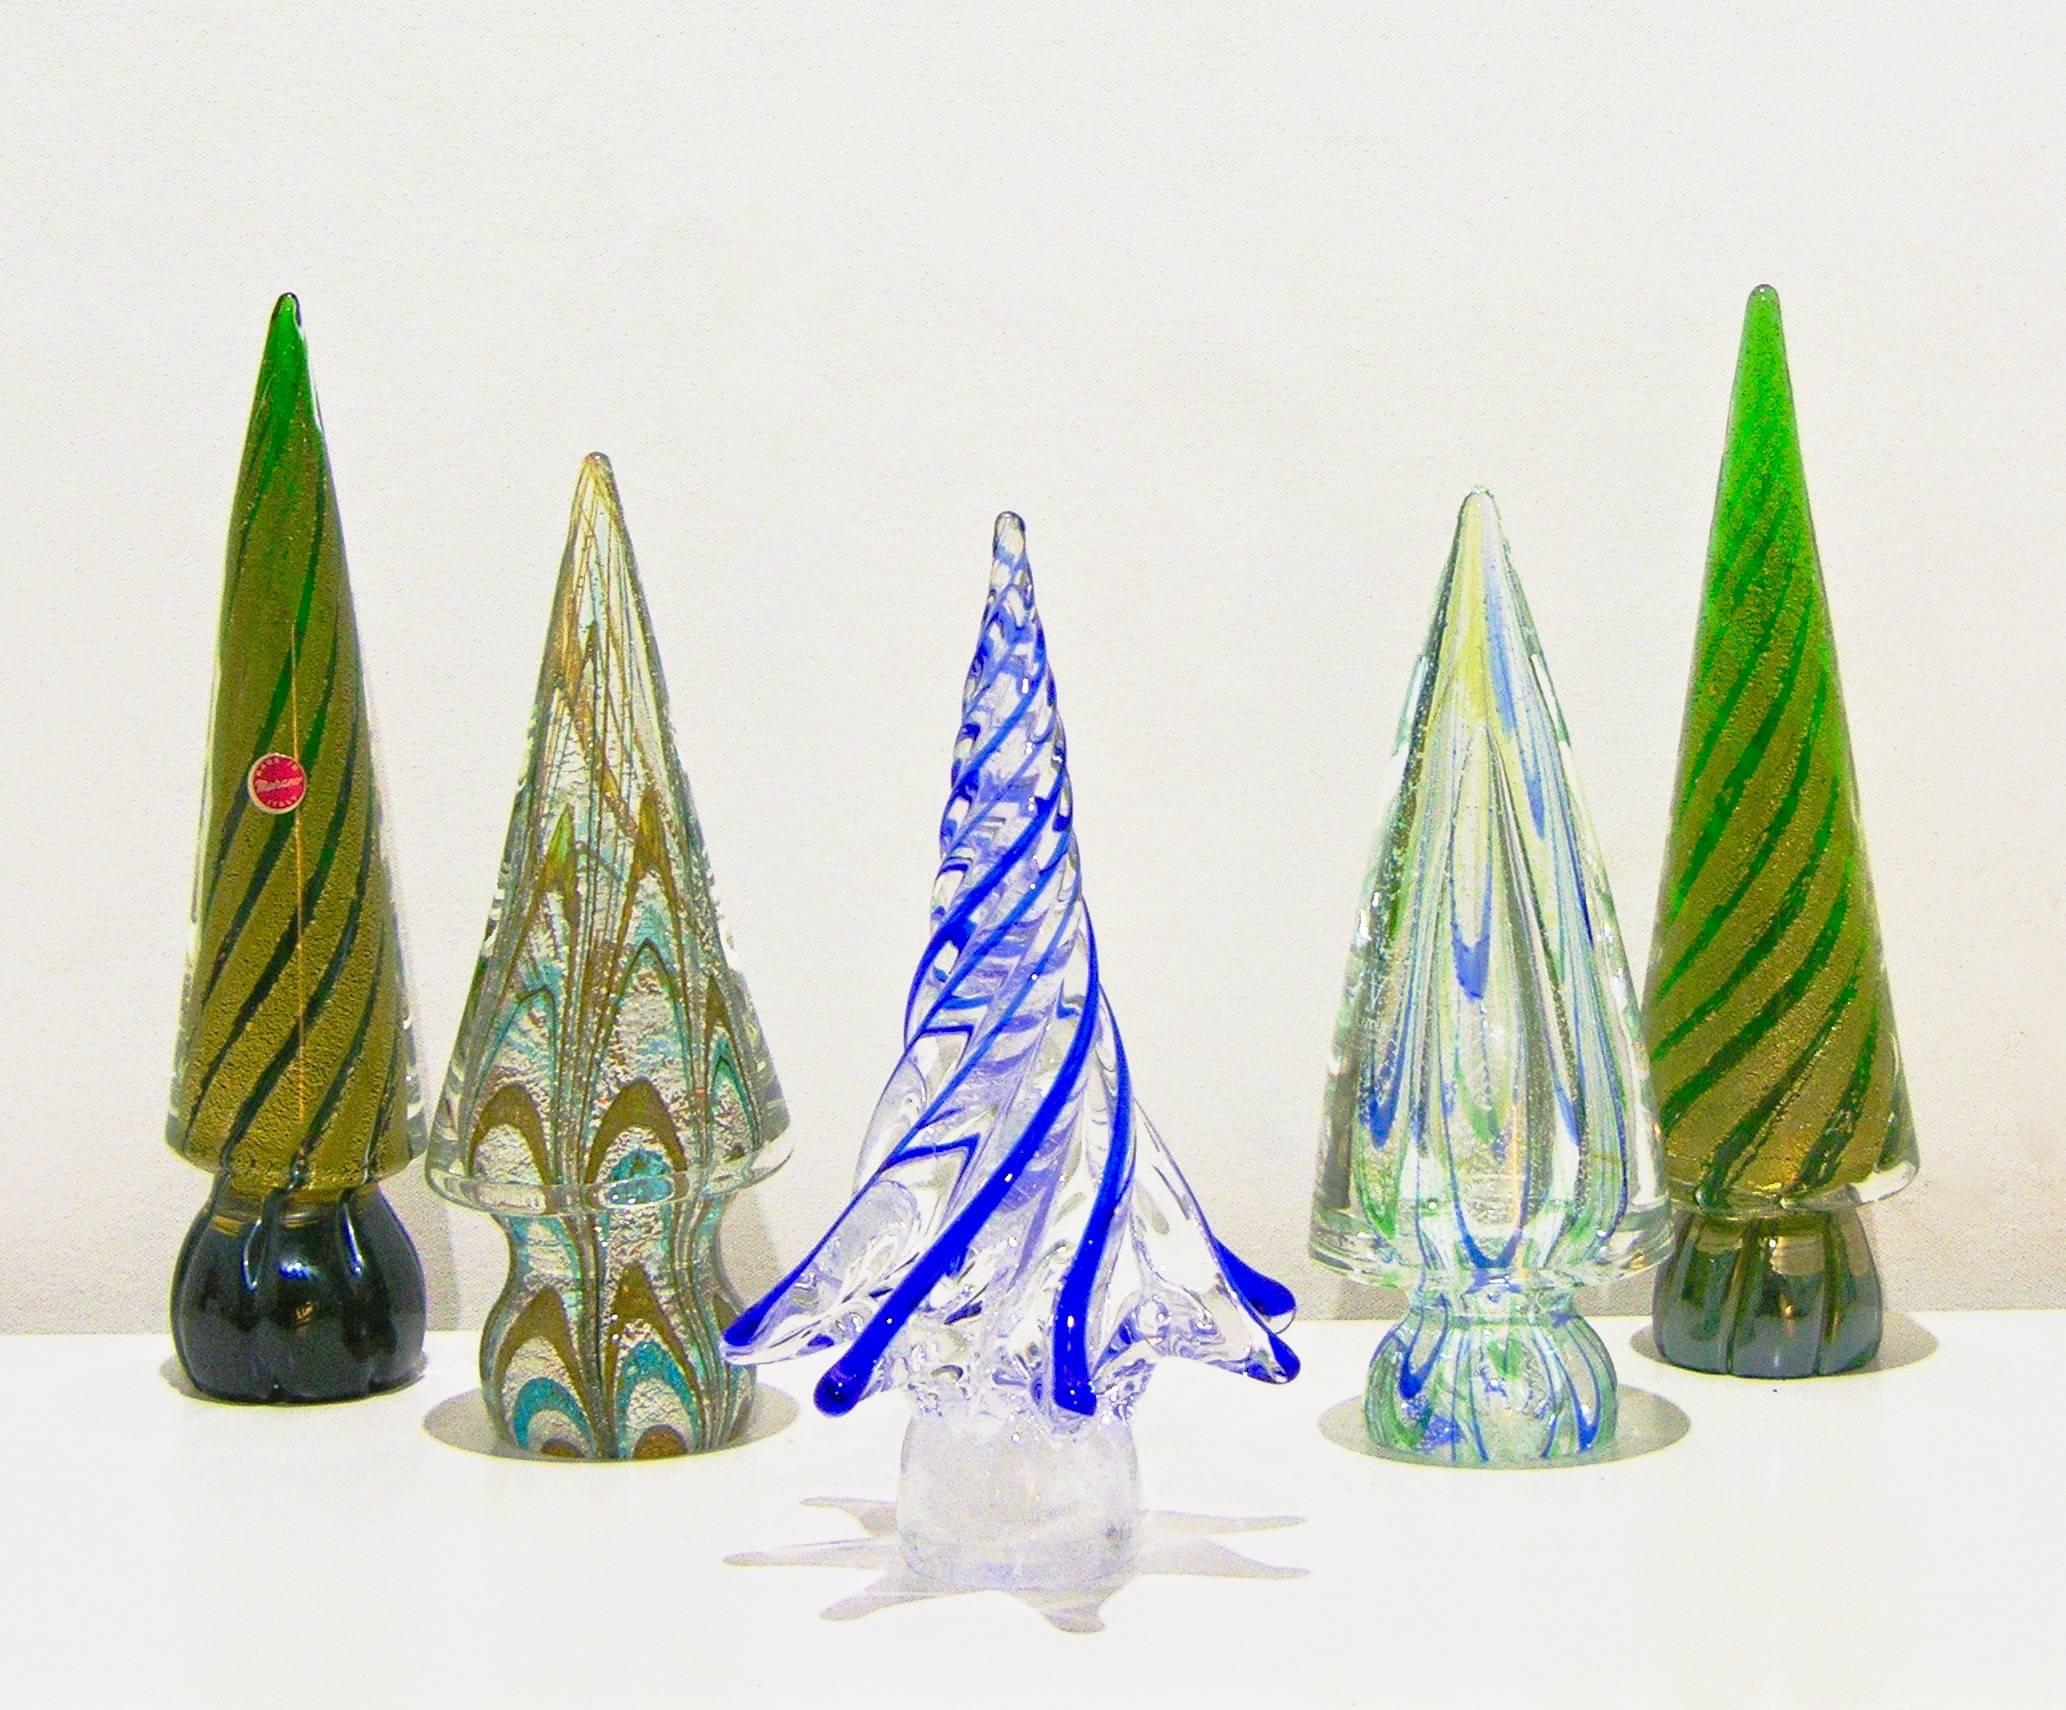 Late 20th Century Vintage Italian Murano Glass Christmas Tree Sculptures by Formia